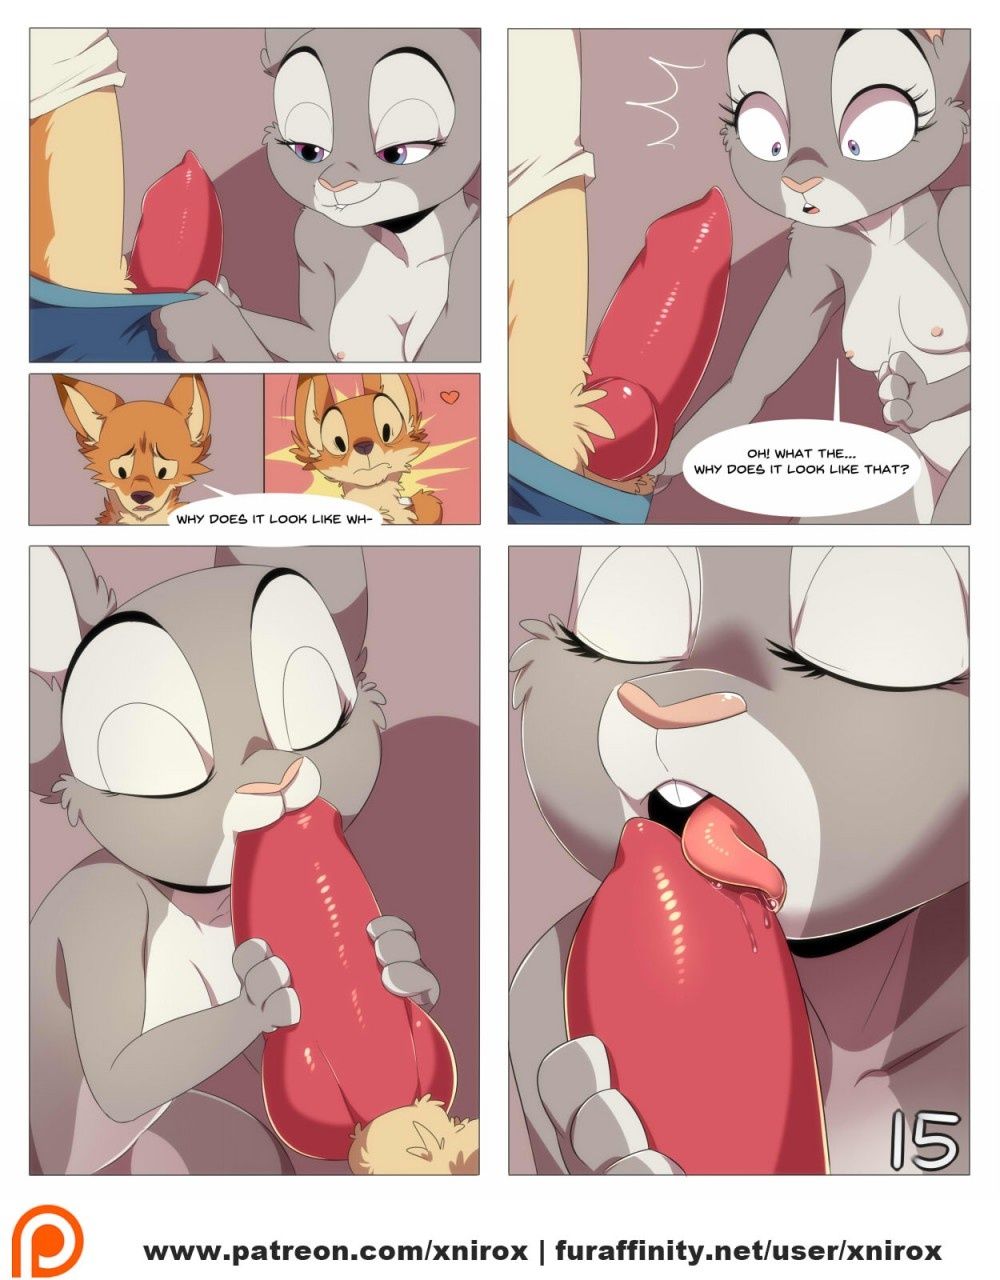 [Xnirox] Zootopia - Twitterpated, Furry Cartoon page 15